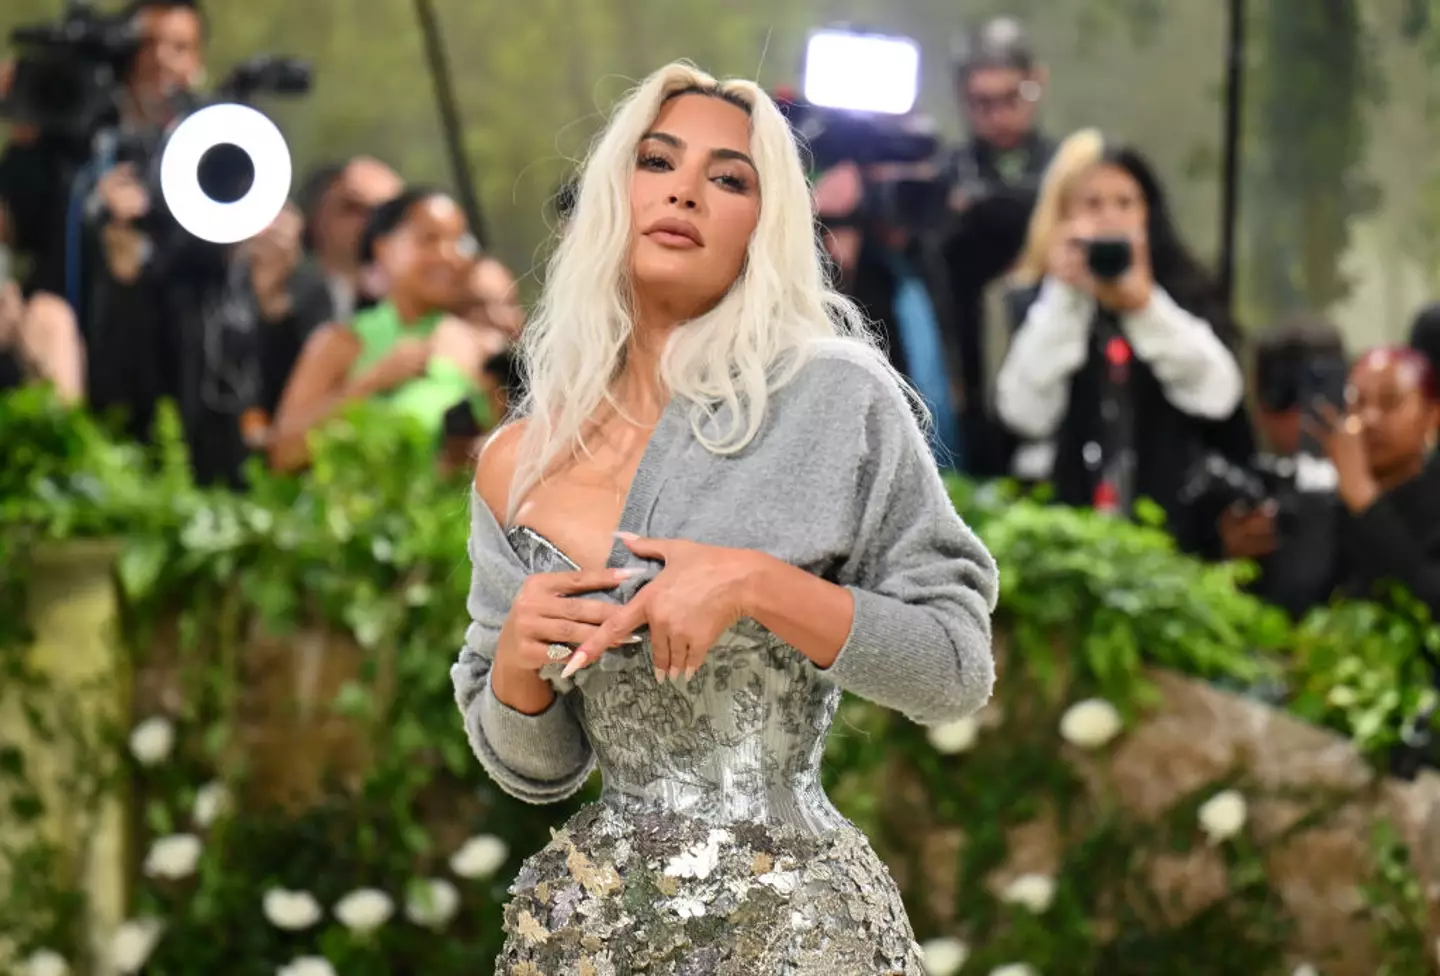 Kim Kardashian has been slammed for her Met Gala outfit. (ANGELA WEISS / Contributor / Getty Images)